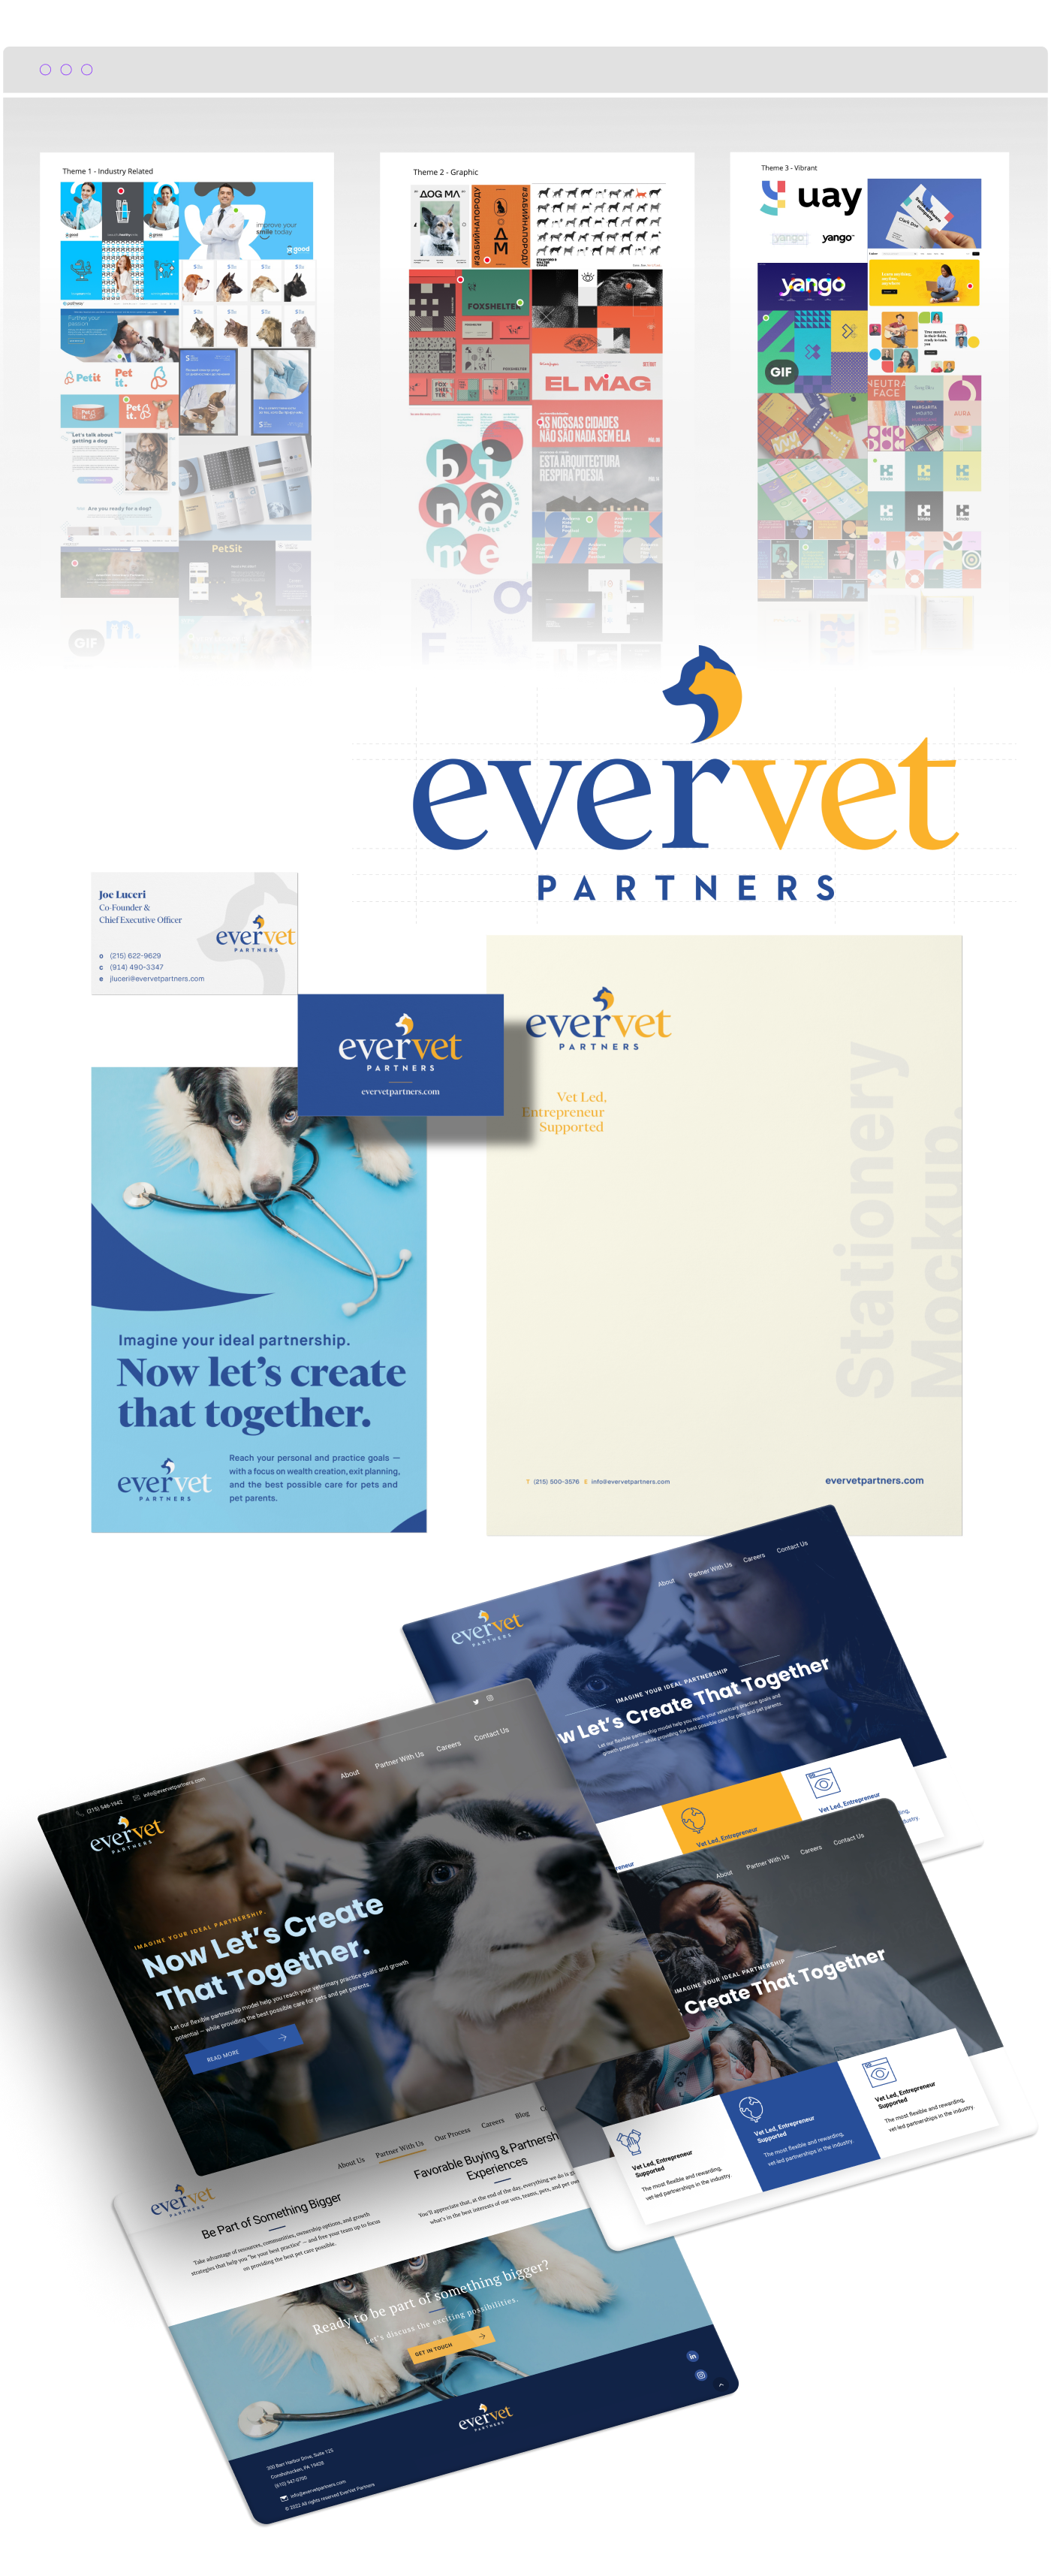 design explorations for EverVet with animal graphics and logos